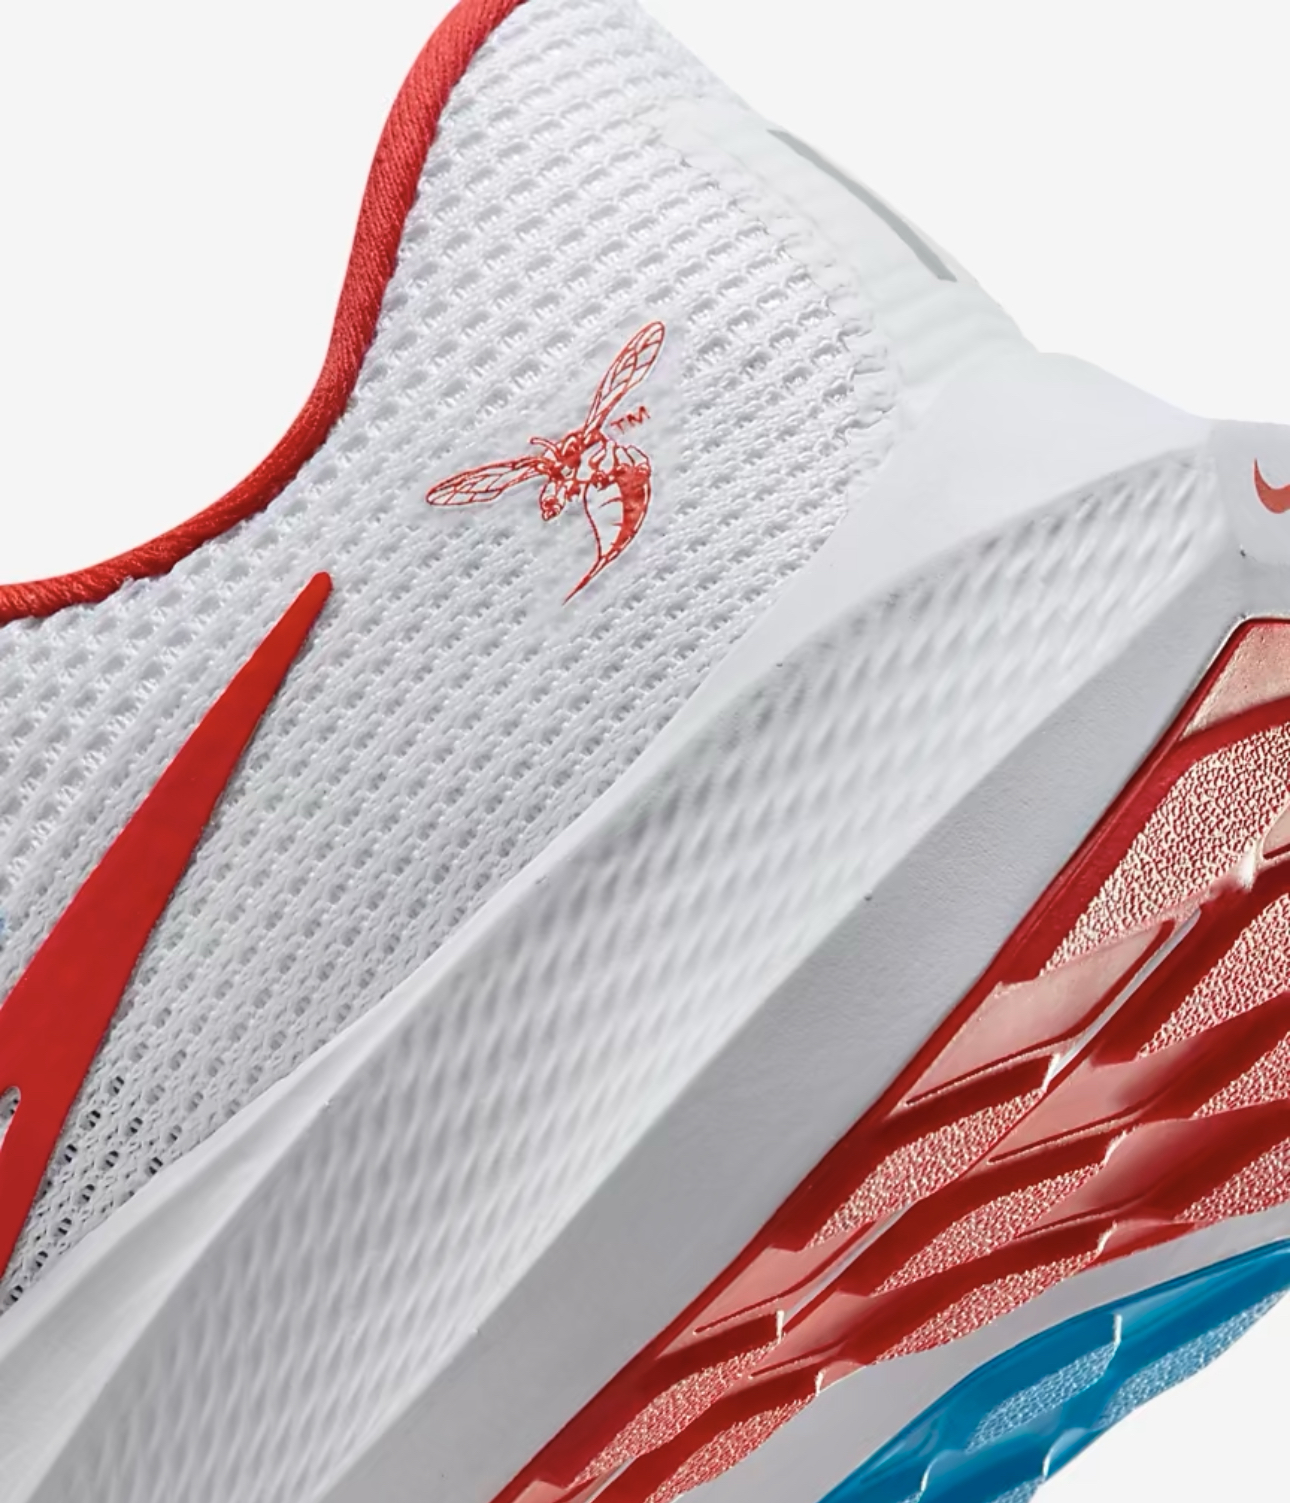 “Delaware State” Nike Pegasus 40 is now available | Sneaker Shop Talk